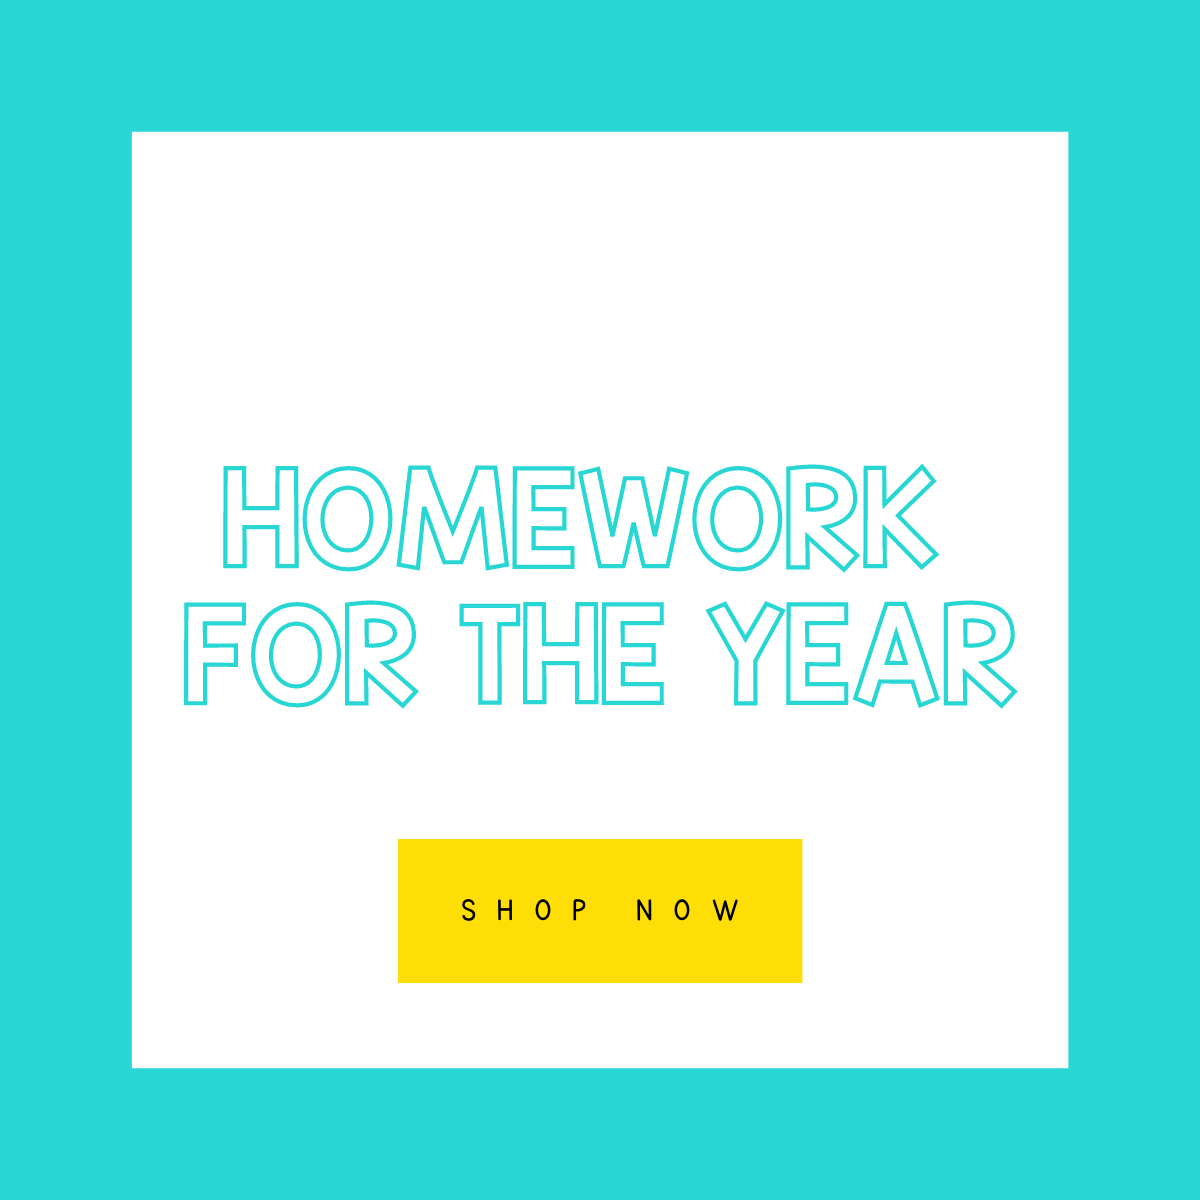 HOMEWORK FOR THE YEAR